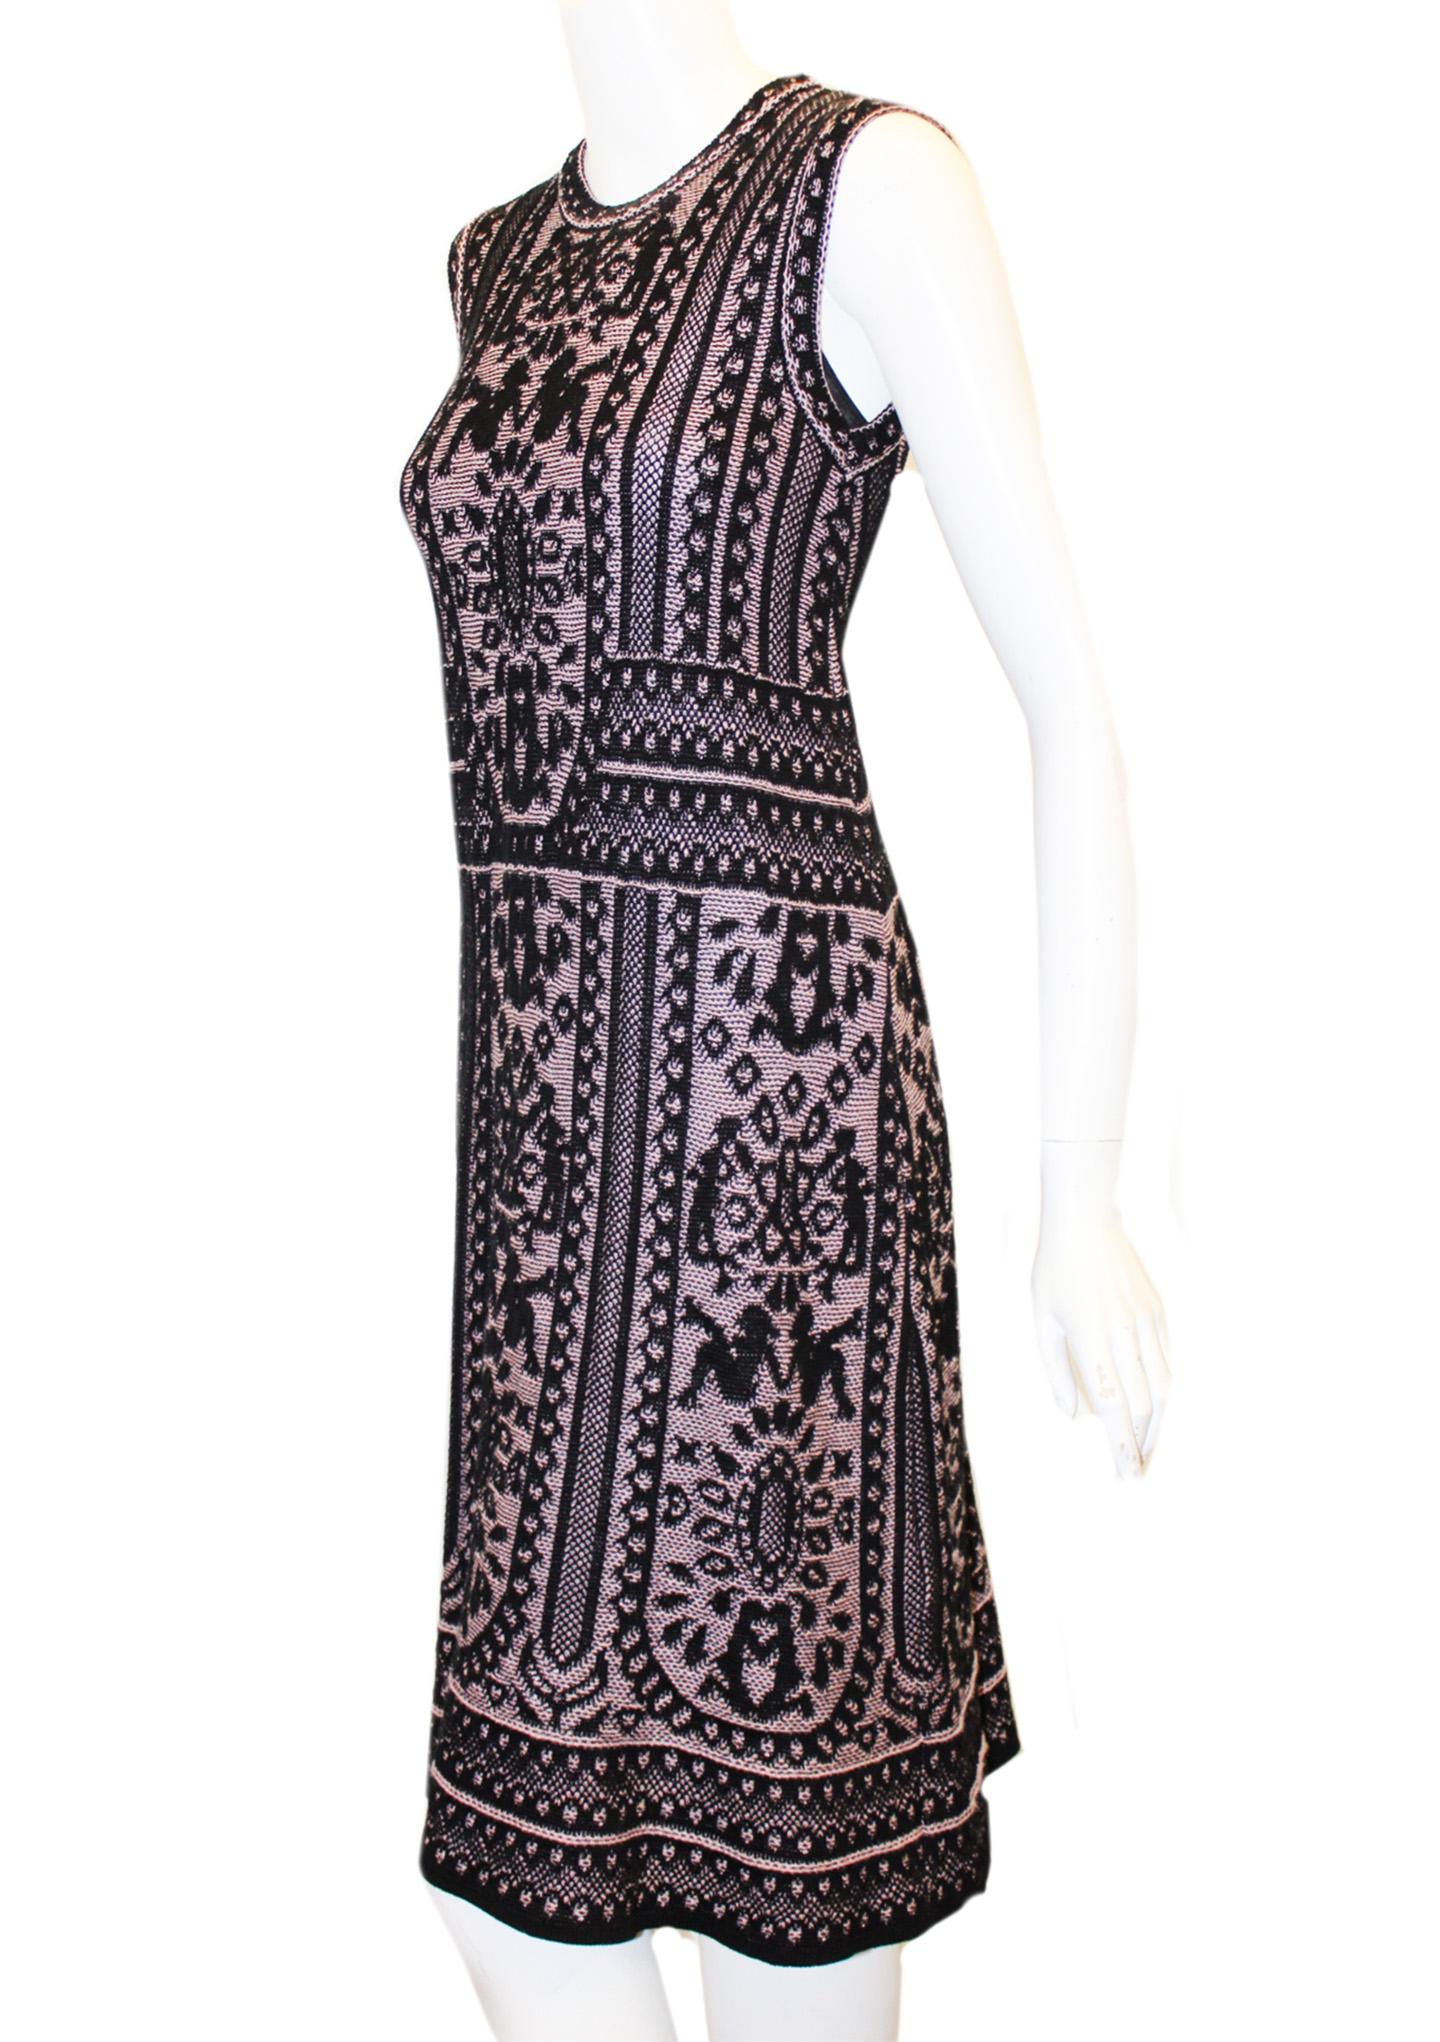 Missoni rose and black dress incorporates in its design silhouettes of women throughout the knitted print.  This dress contains a black slip.   This round collar midi length dress is unique in its design that emphasizes the female body.  This dress